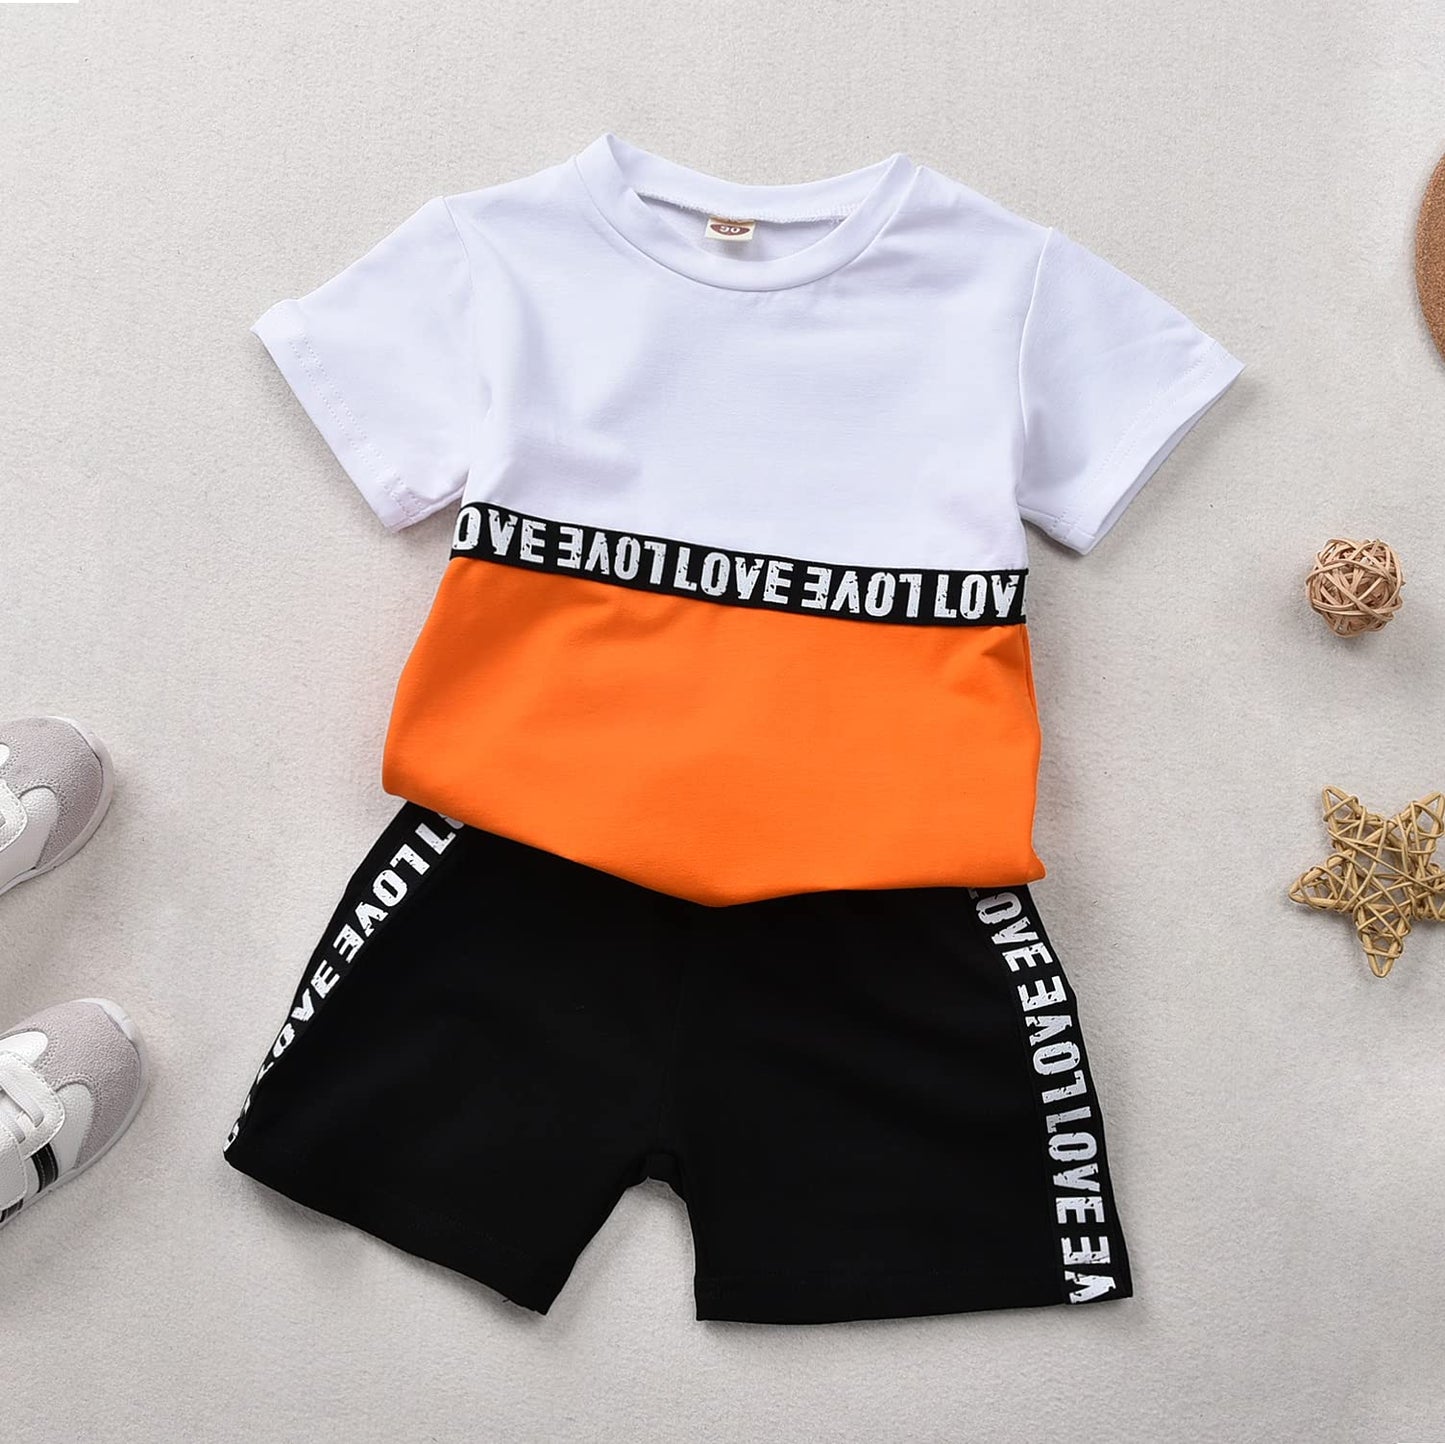 Toddler Baby Boys Summer Clothes Sets T-Shirt Shorts 2 Pieces Outfits Suits (White, 5T)